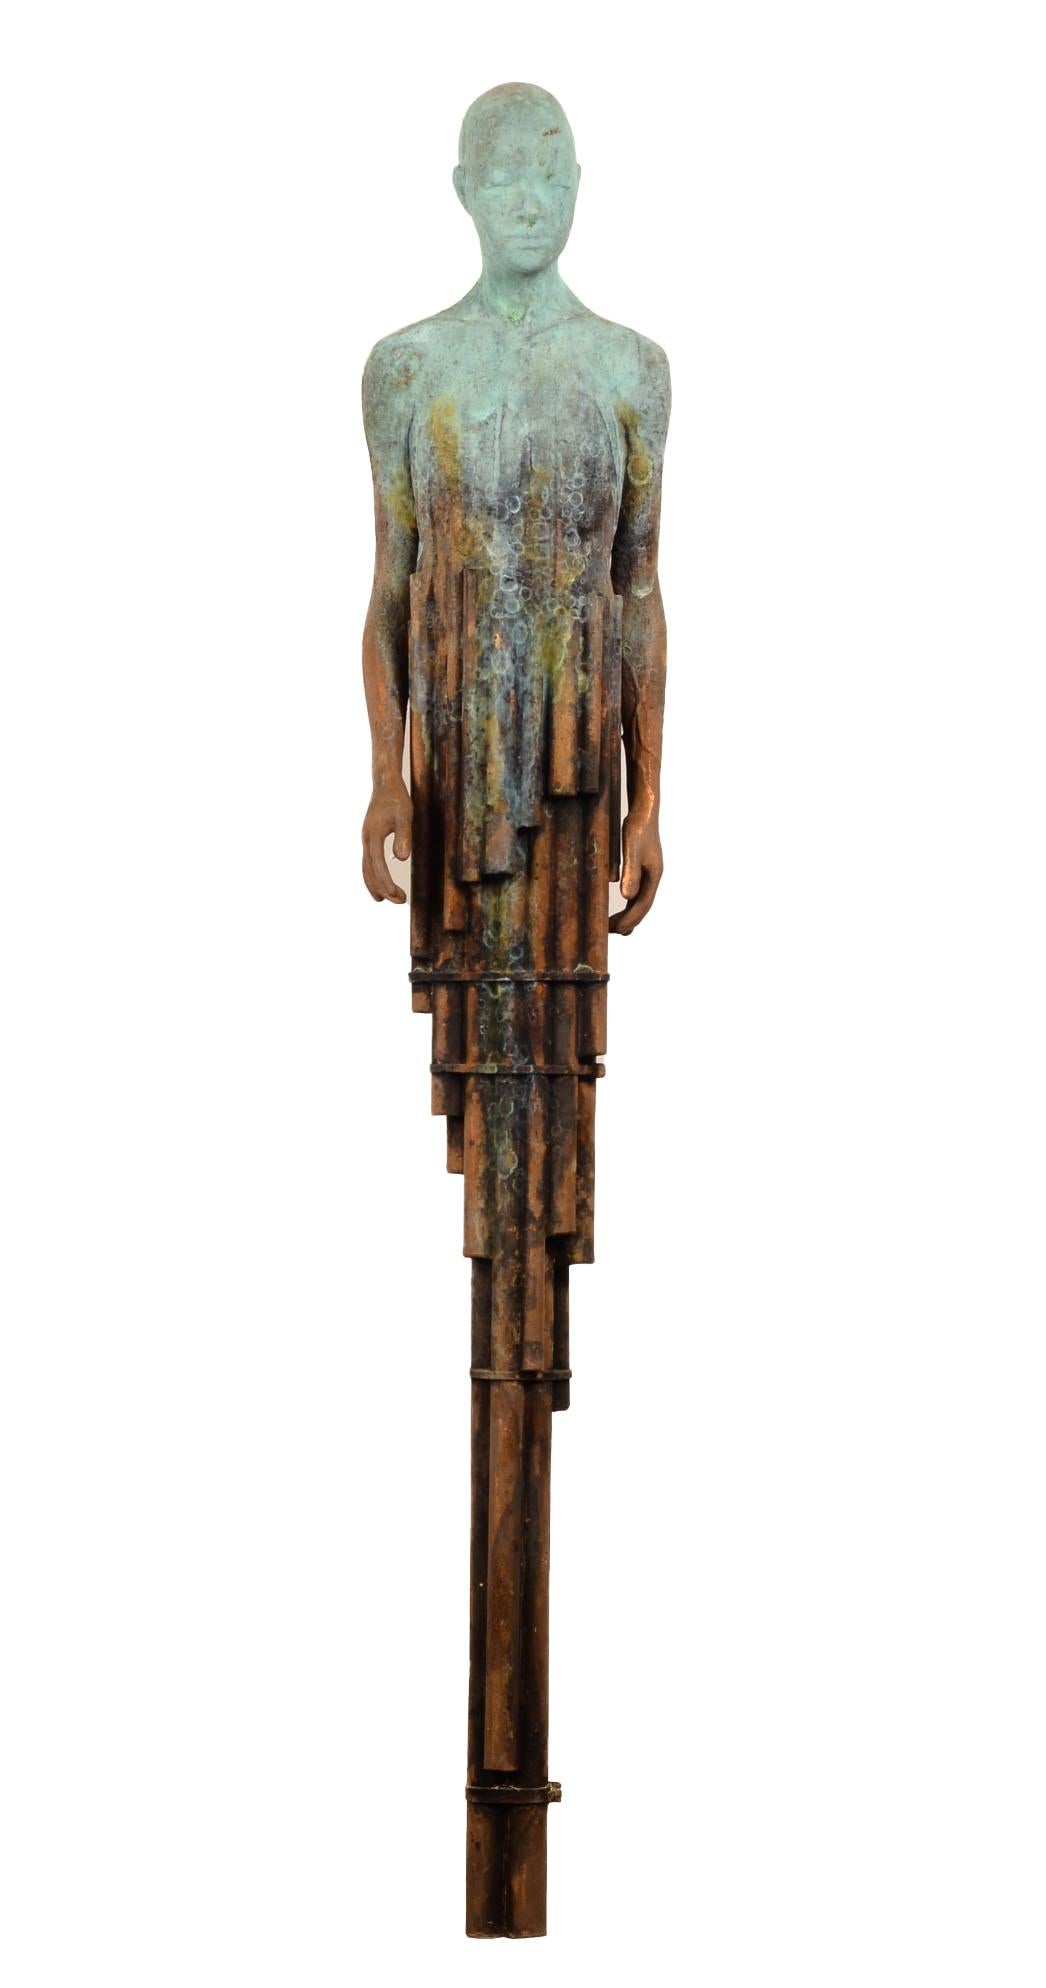 Jesus Curia Perez Abstract Sculpture - Tube II - Wall Mounted Bronze Sculpture with Human Form and Lush Patina